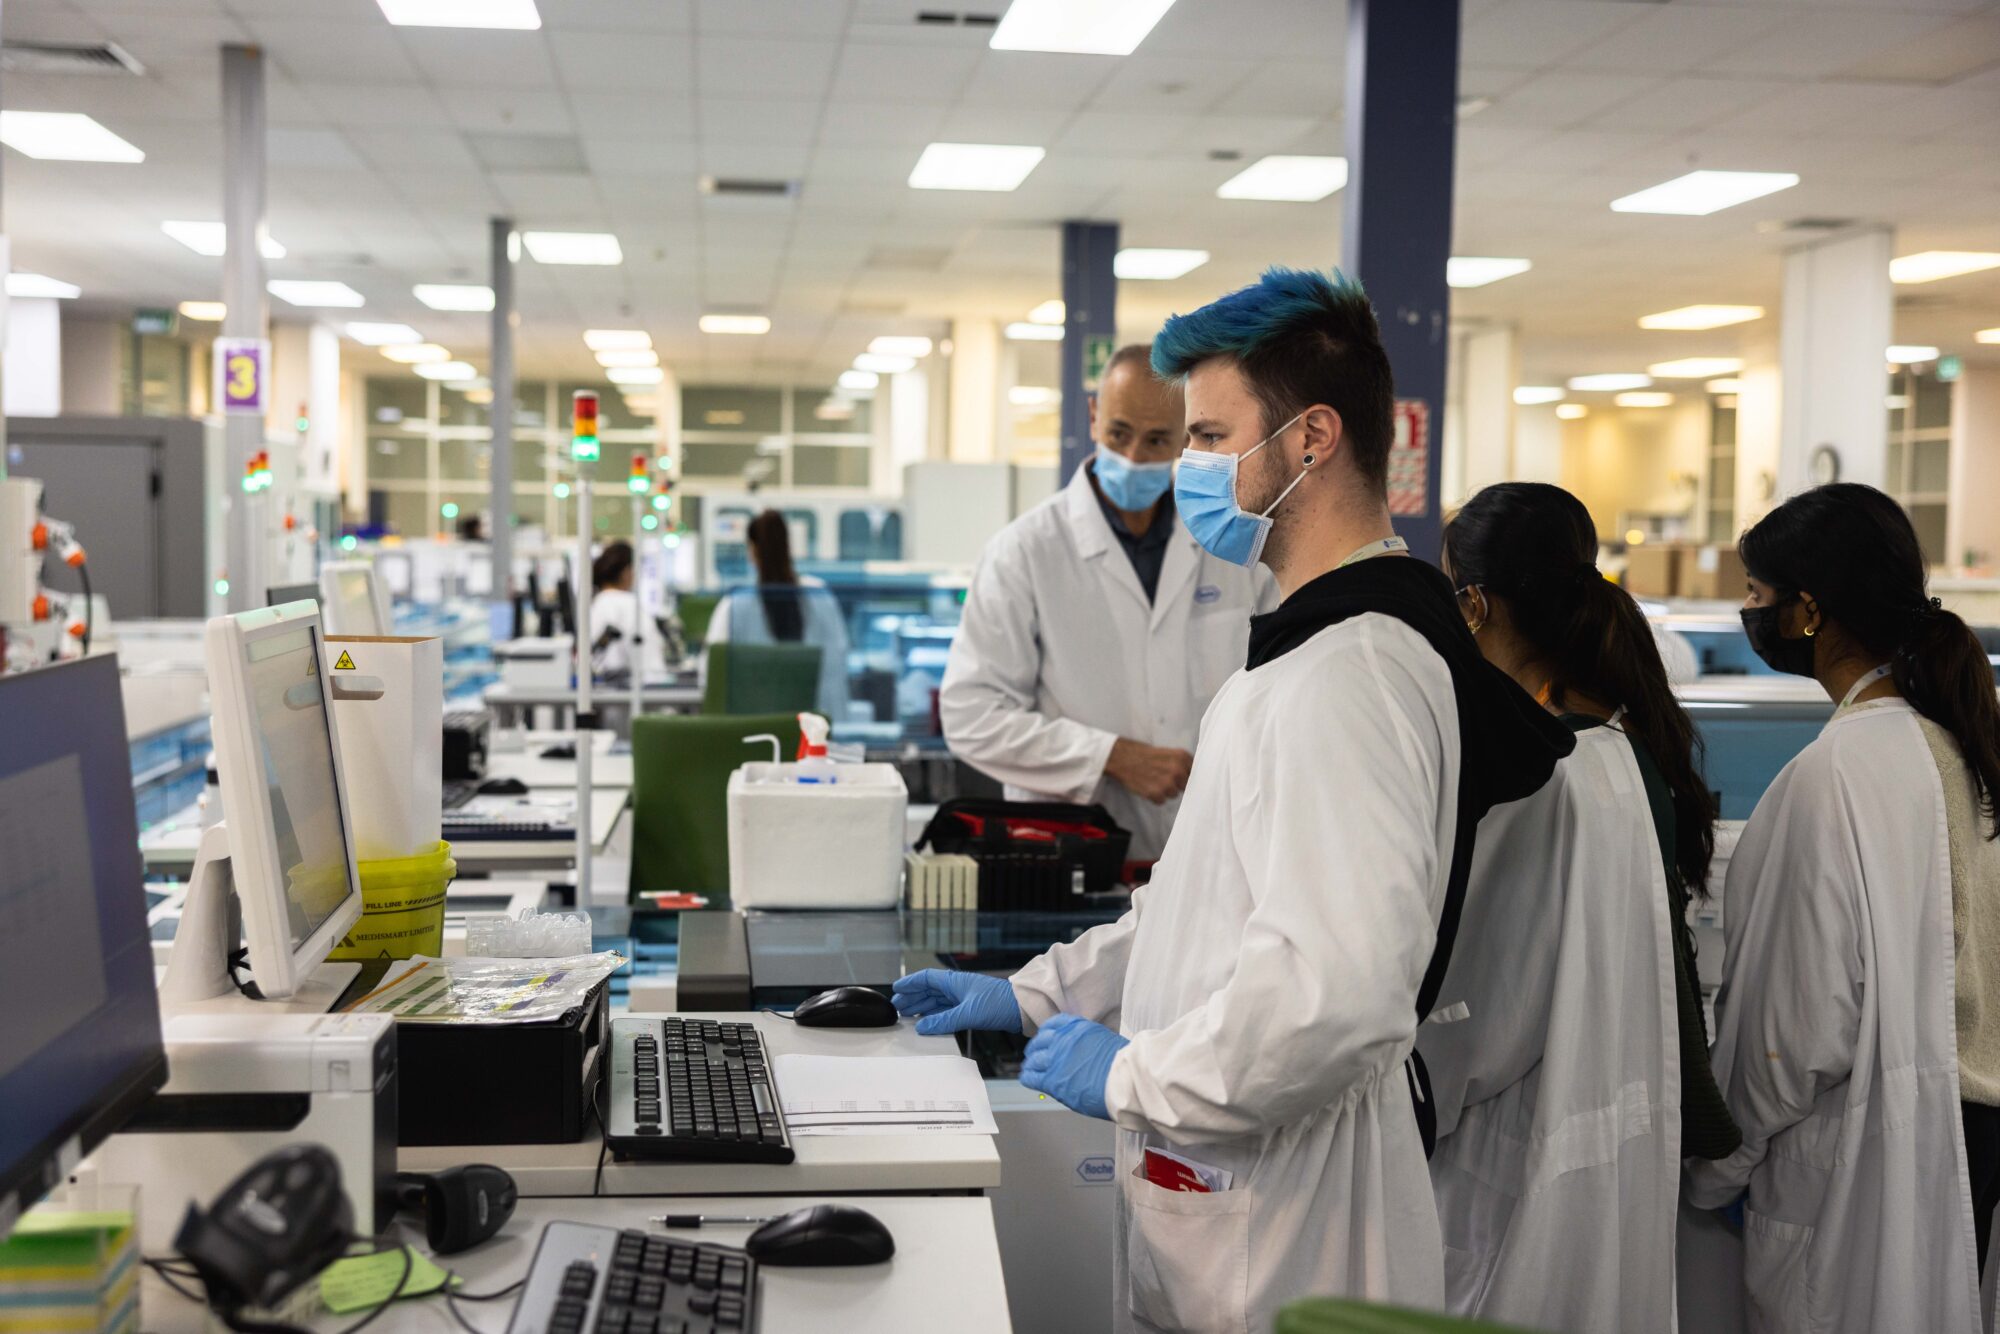 Auckland laboratory was the final site to go live for Project Nova